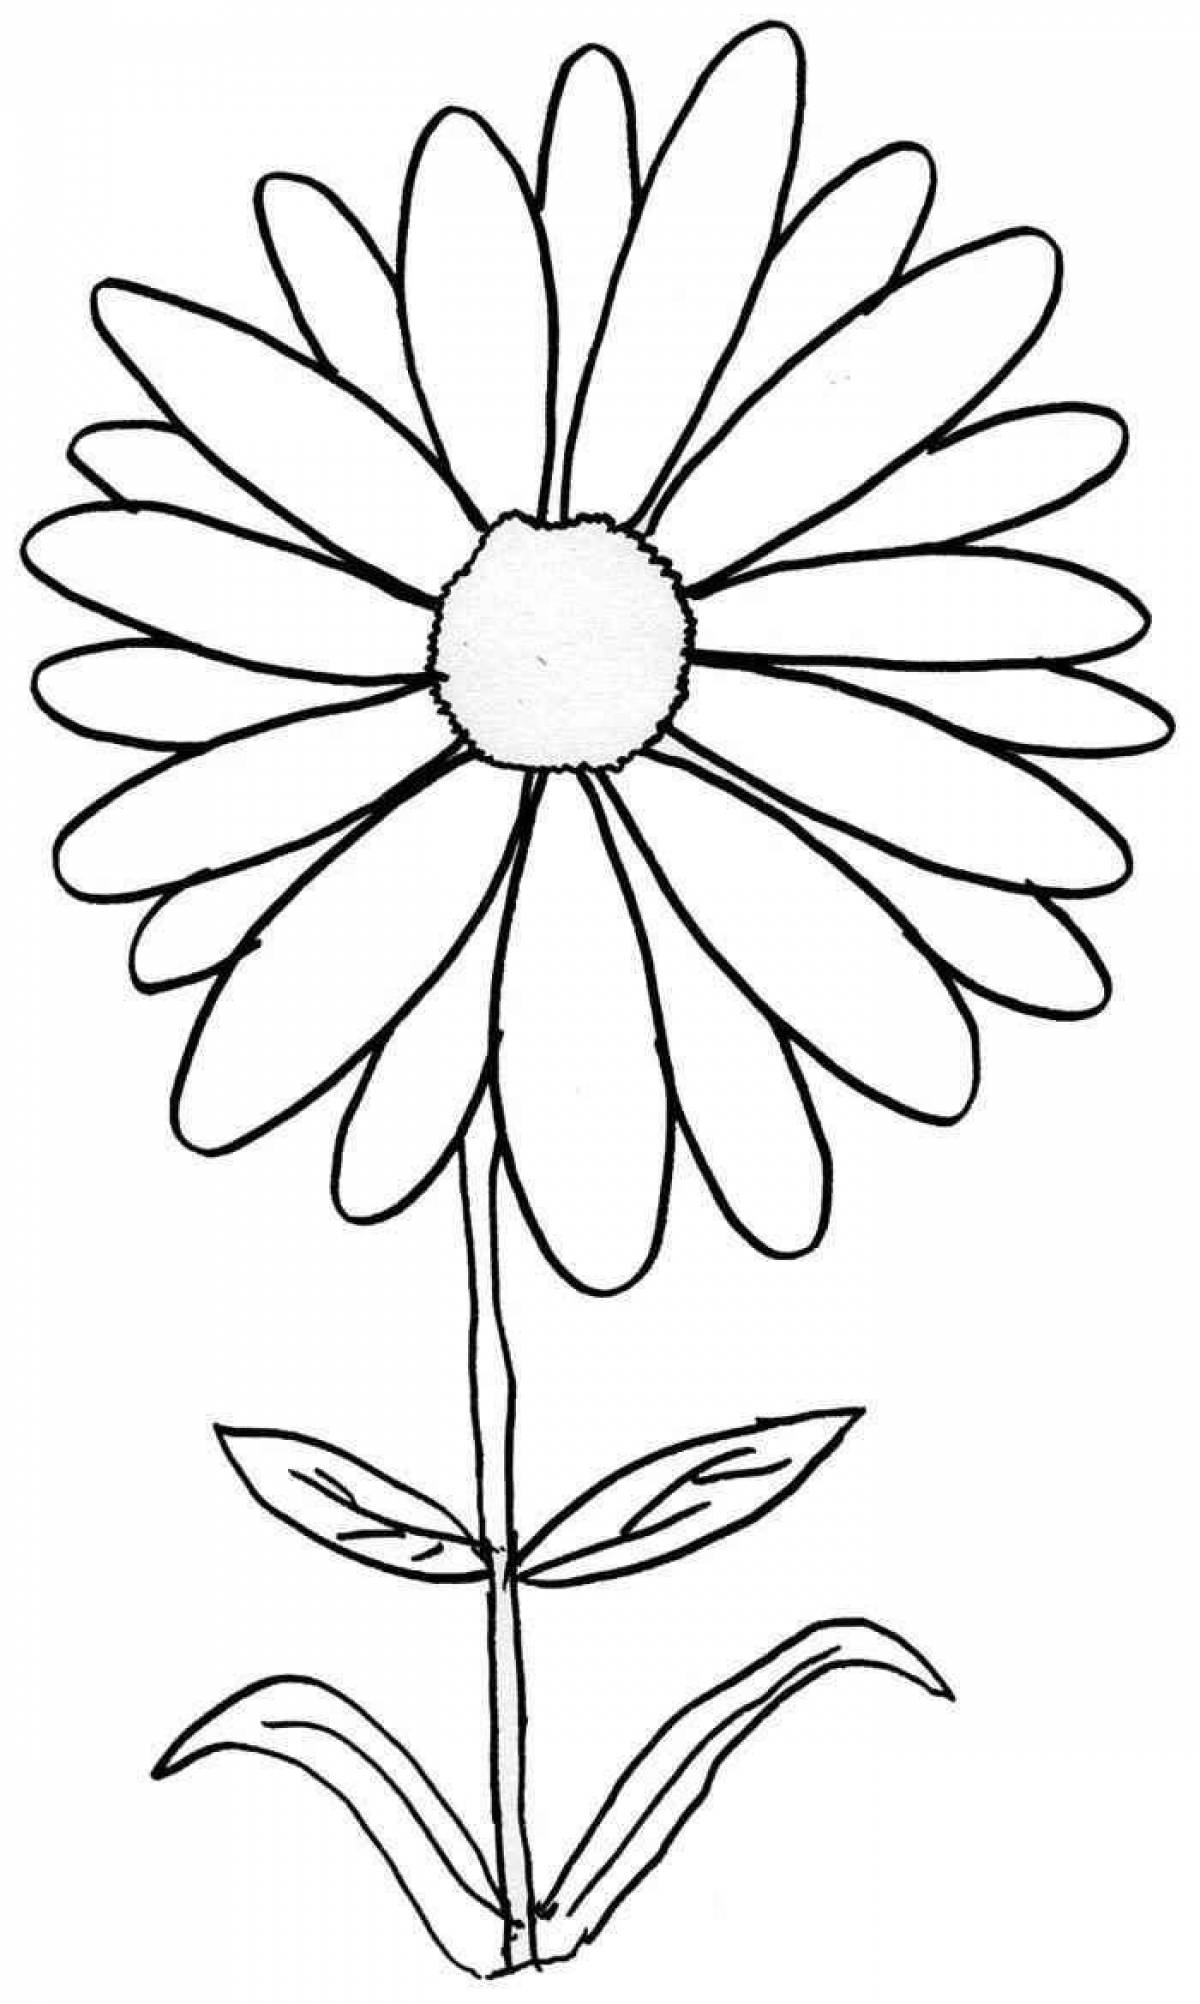 Beautiful daisy coloring page